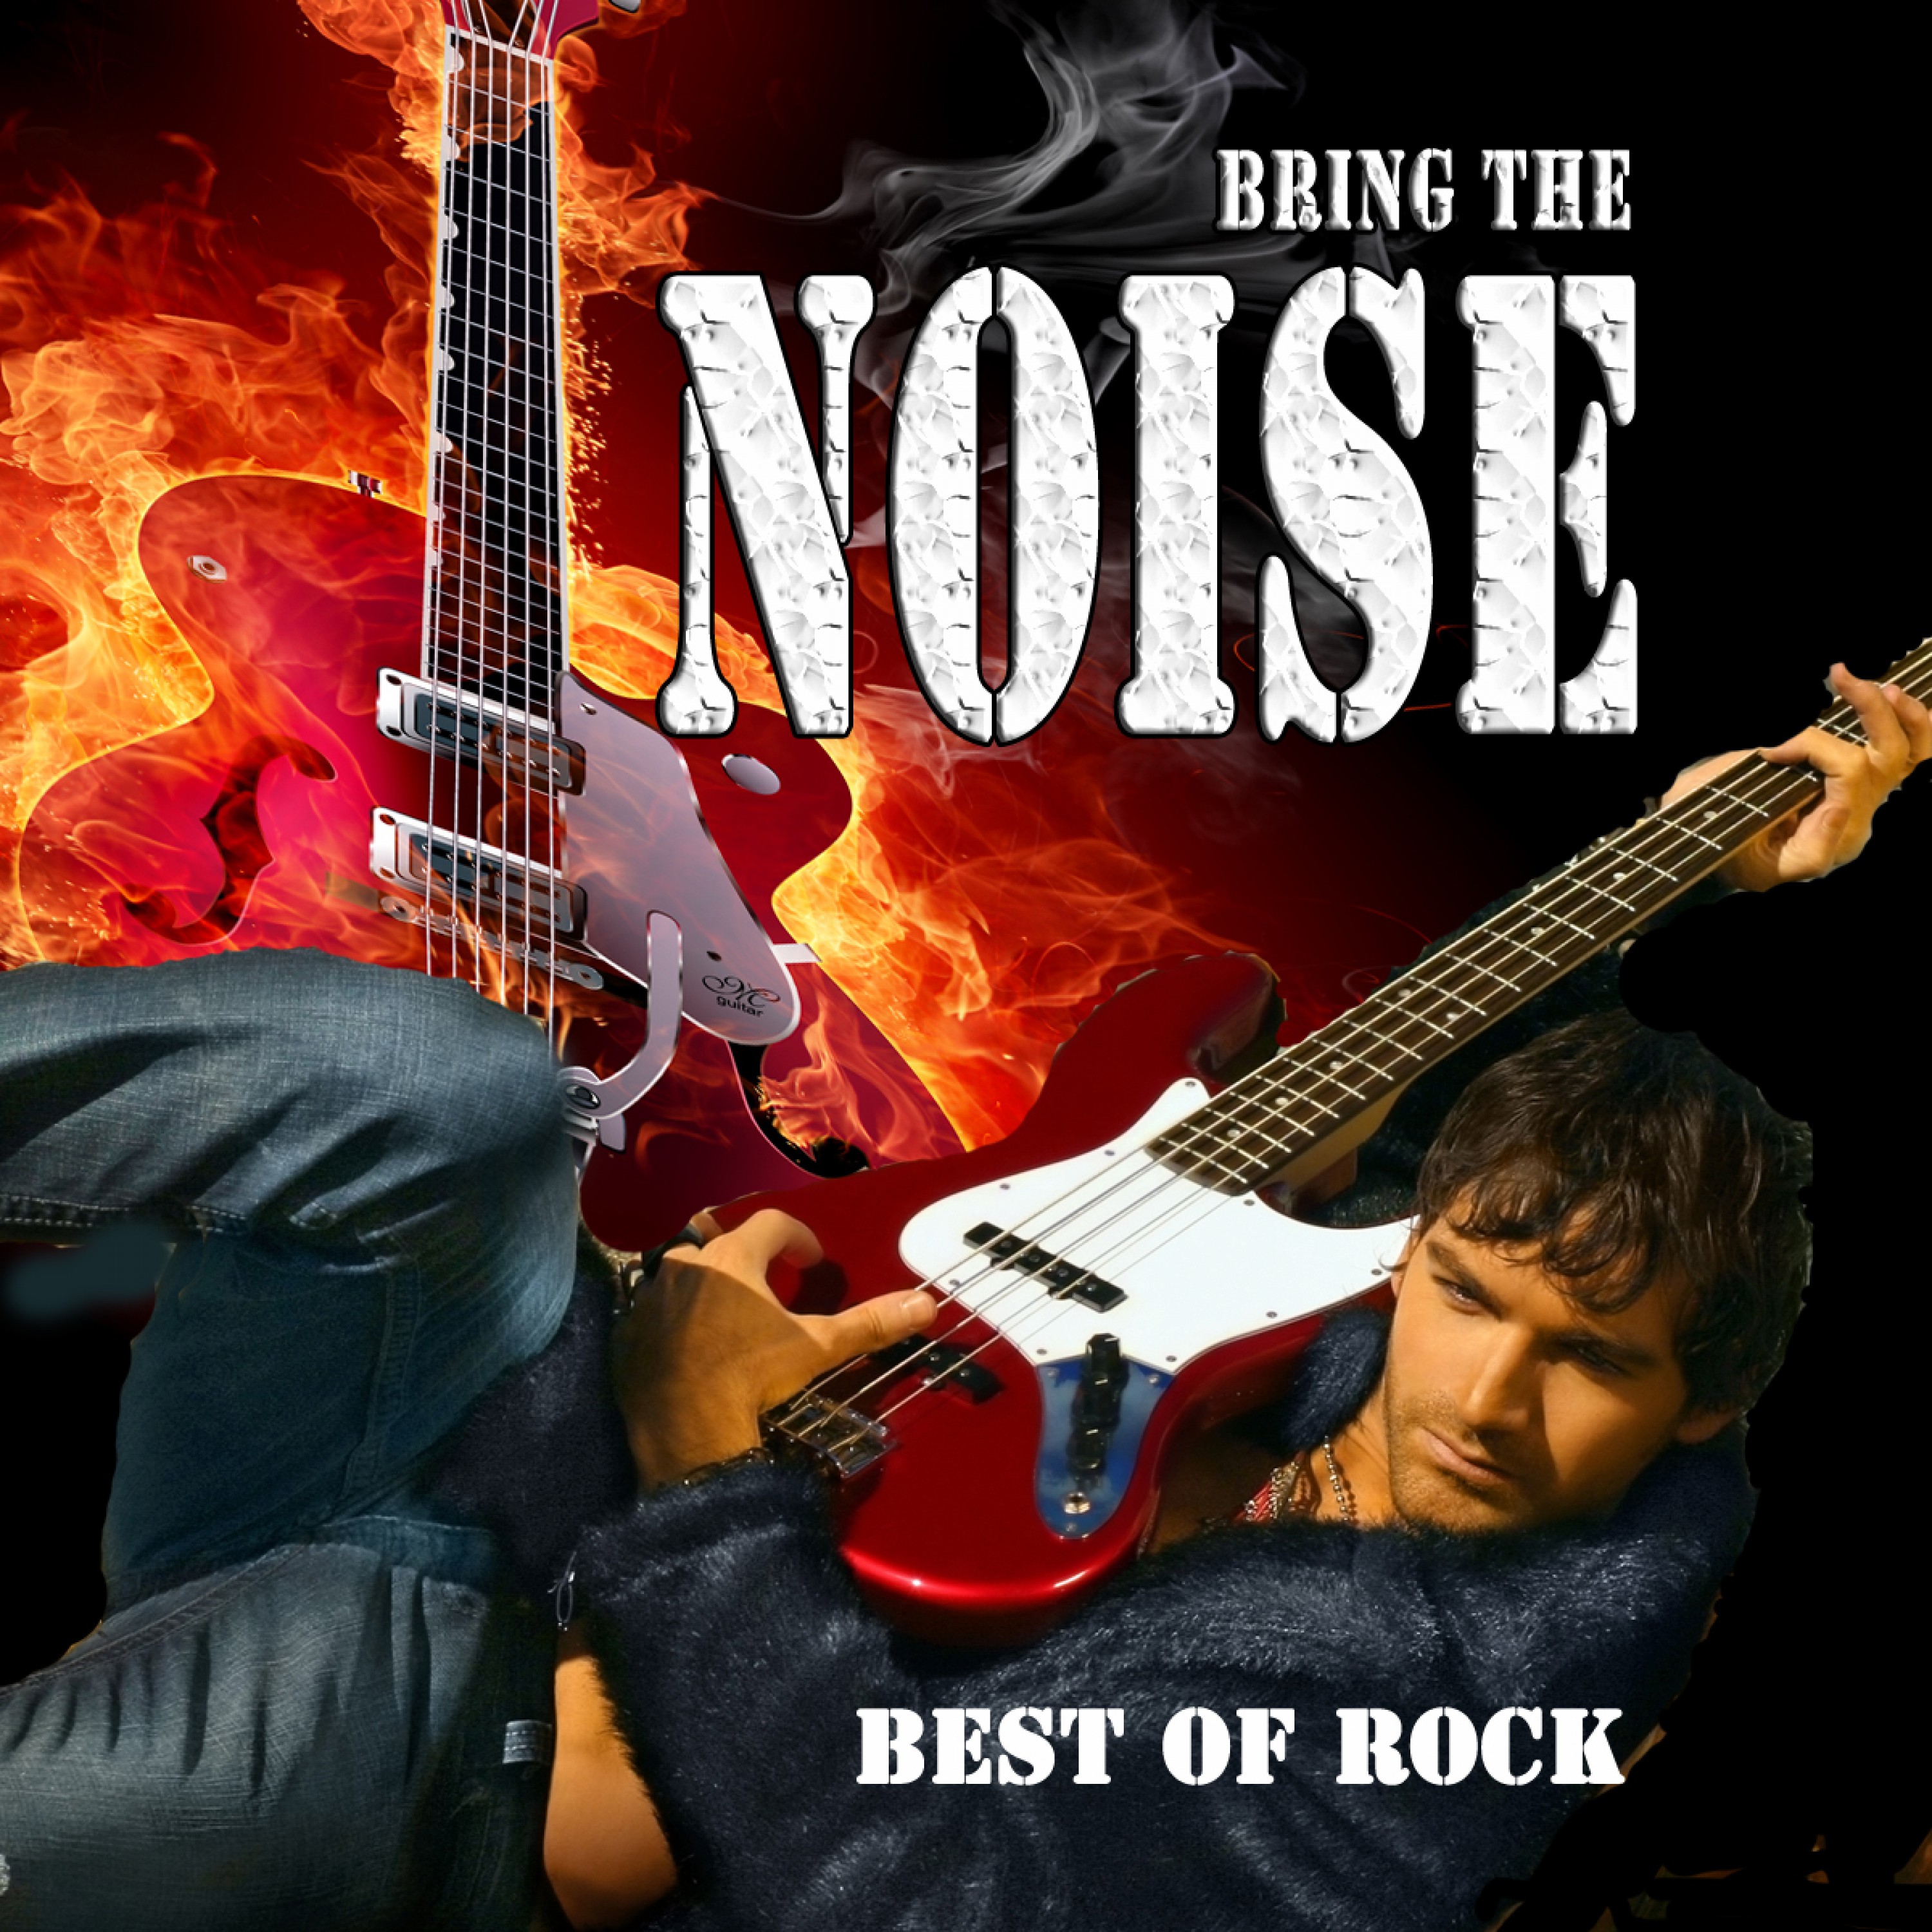 Best of Rock "Bring the Noise"